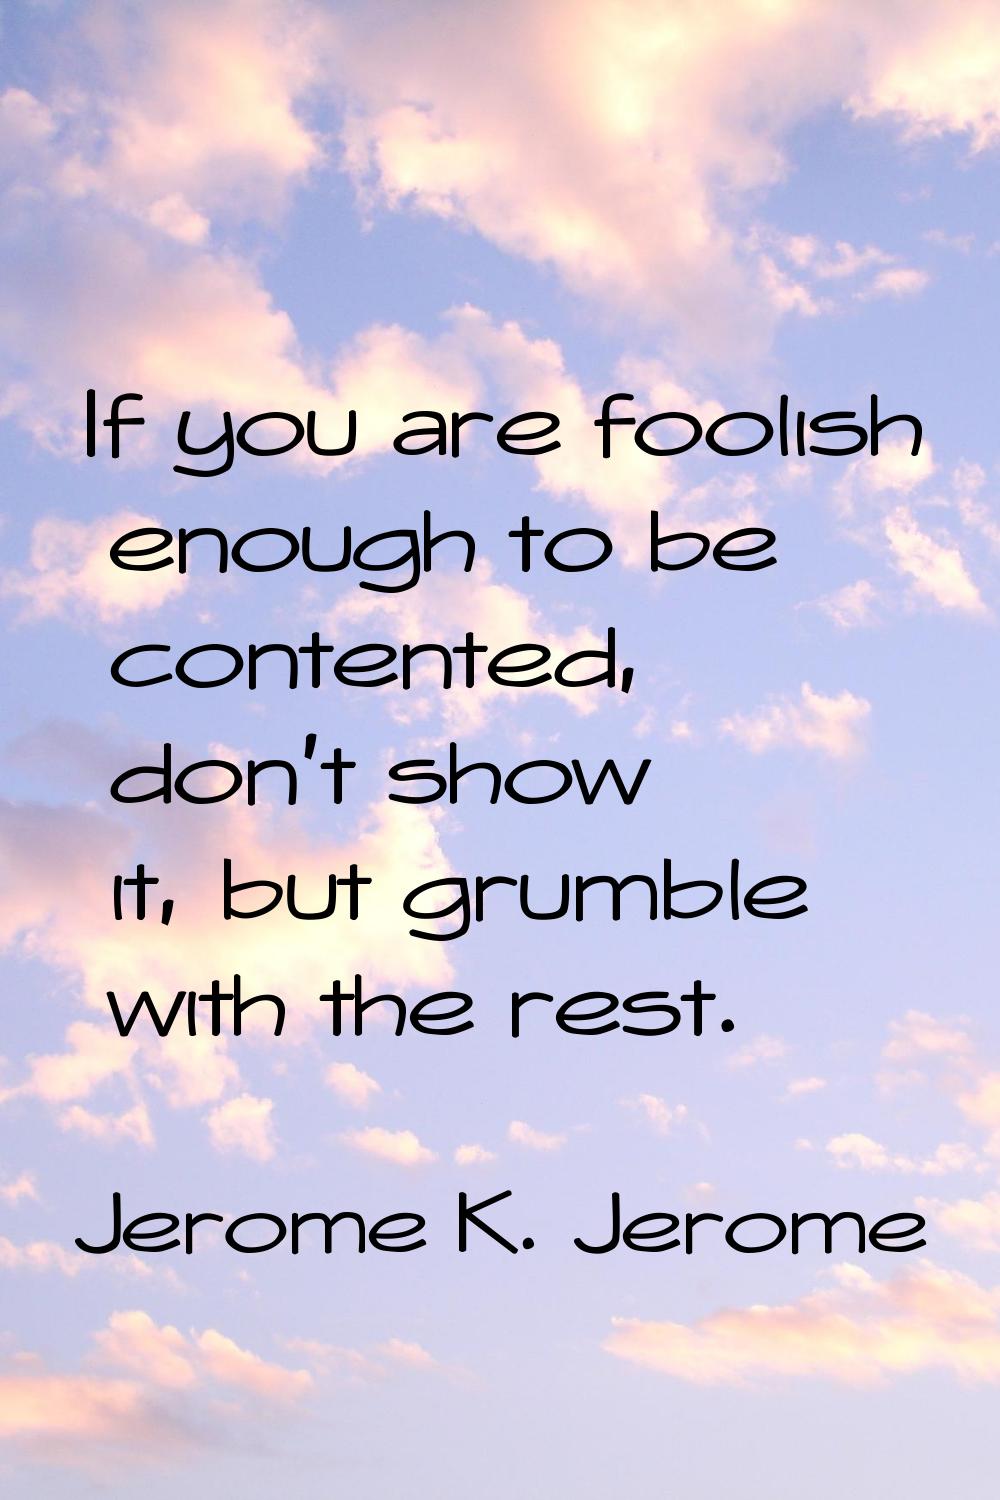 If you are foolish enough to be contented, don't show it, but grumble with the rest.